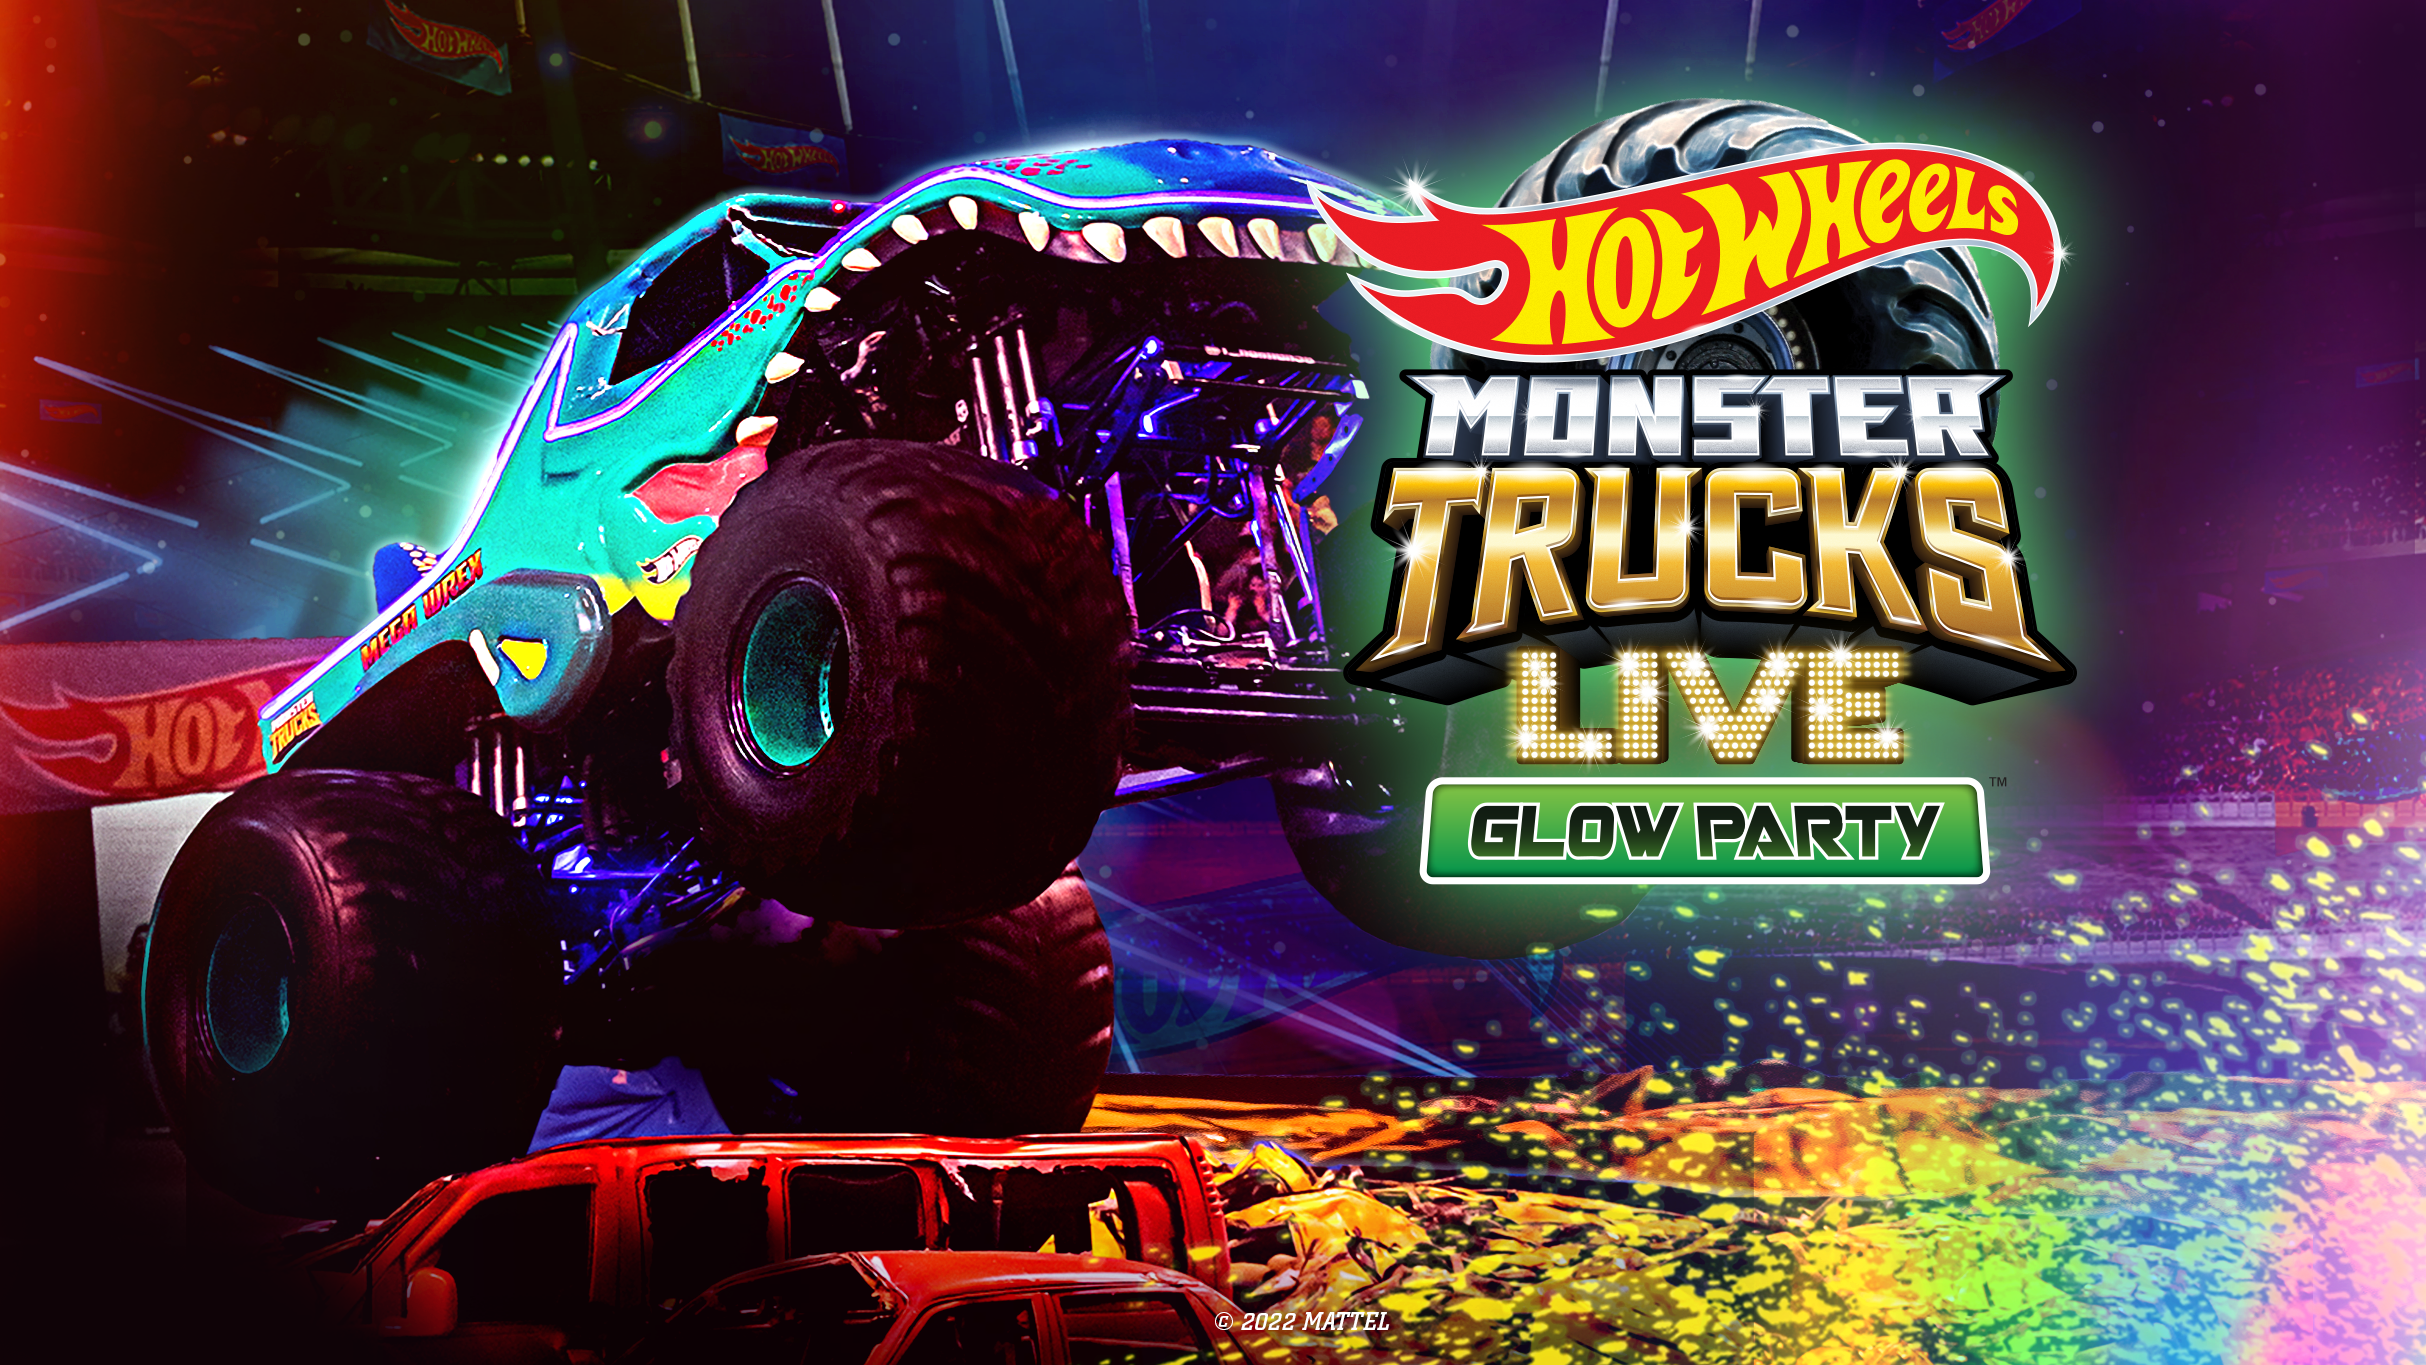 new presale passcode for Hot Wheels Monster Trucks Live Glow Party face value tickets in Council Bluffs